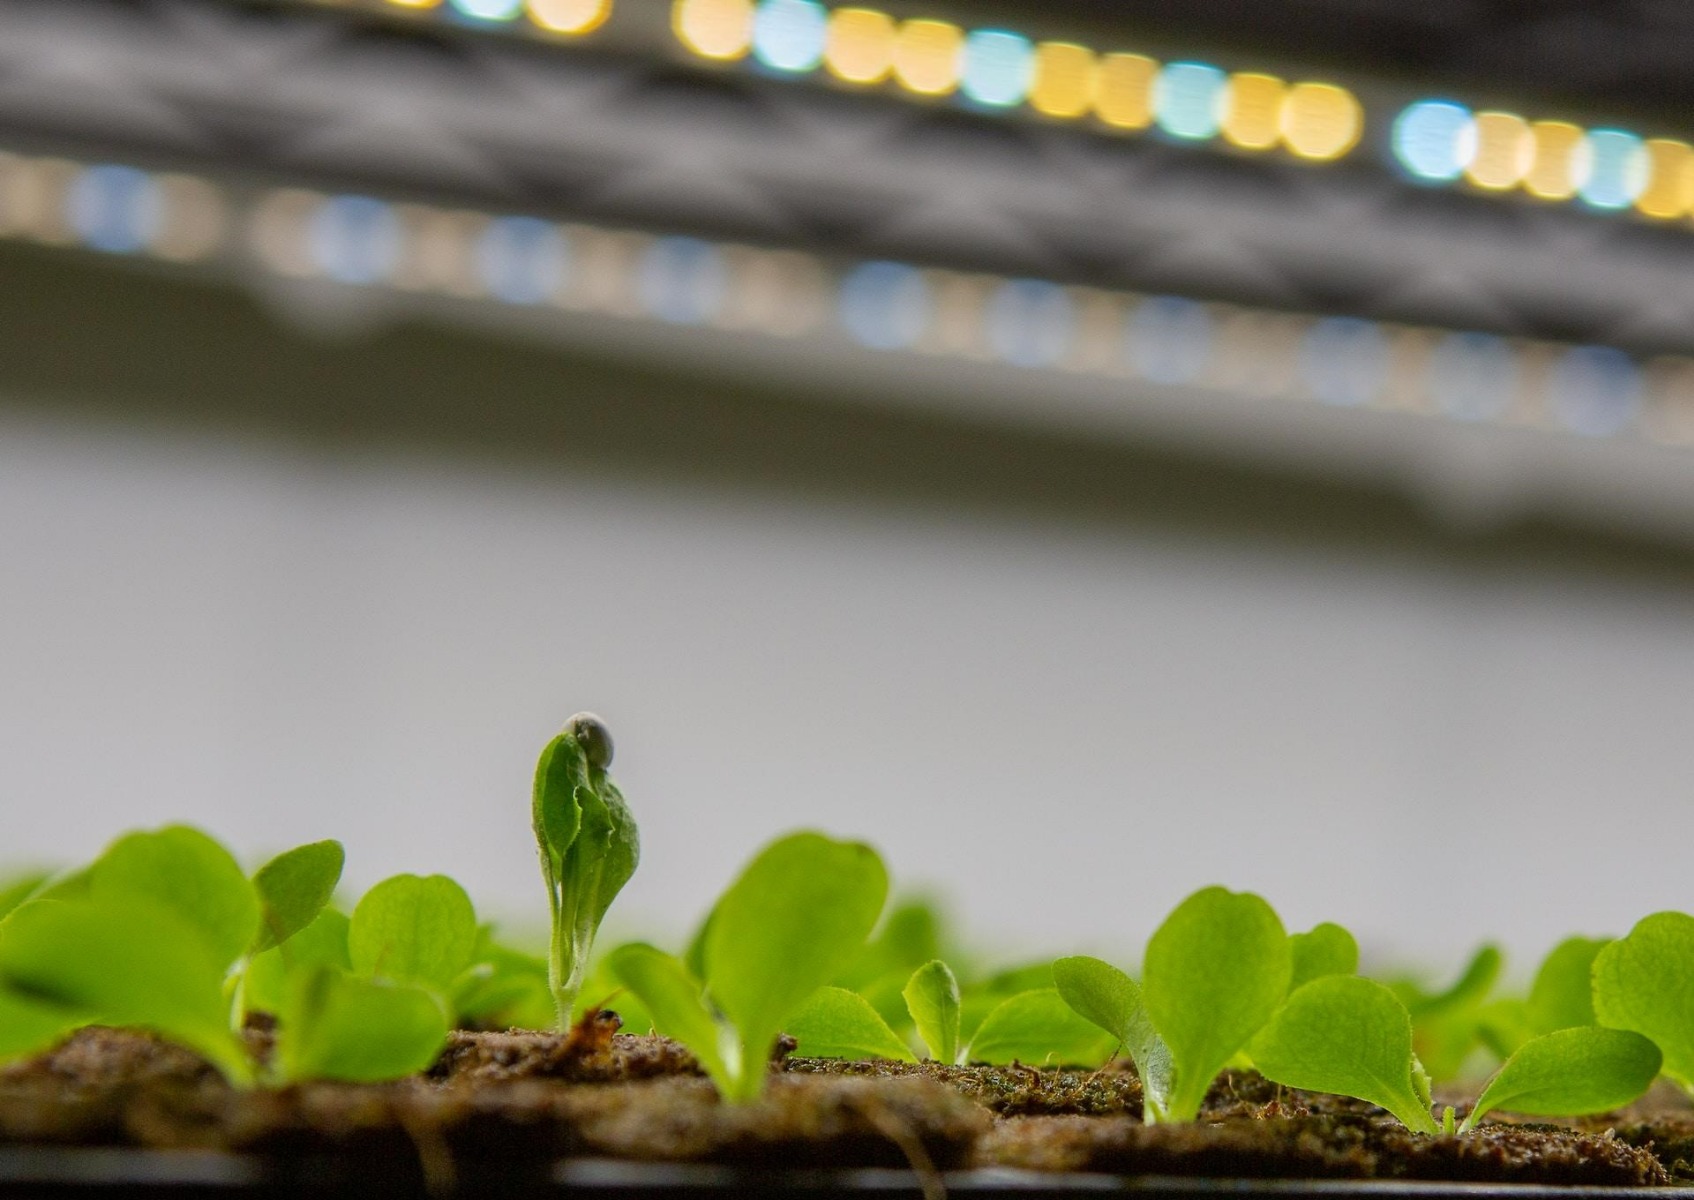  Seedlings starting to emerge while growing under LED lights